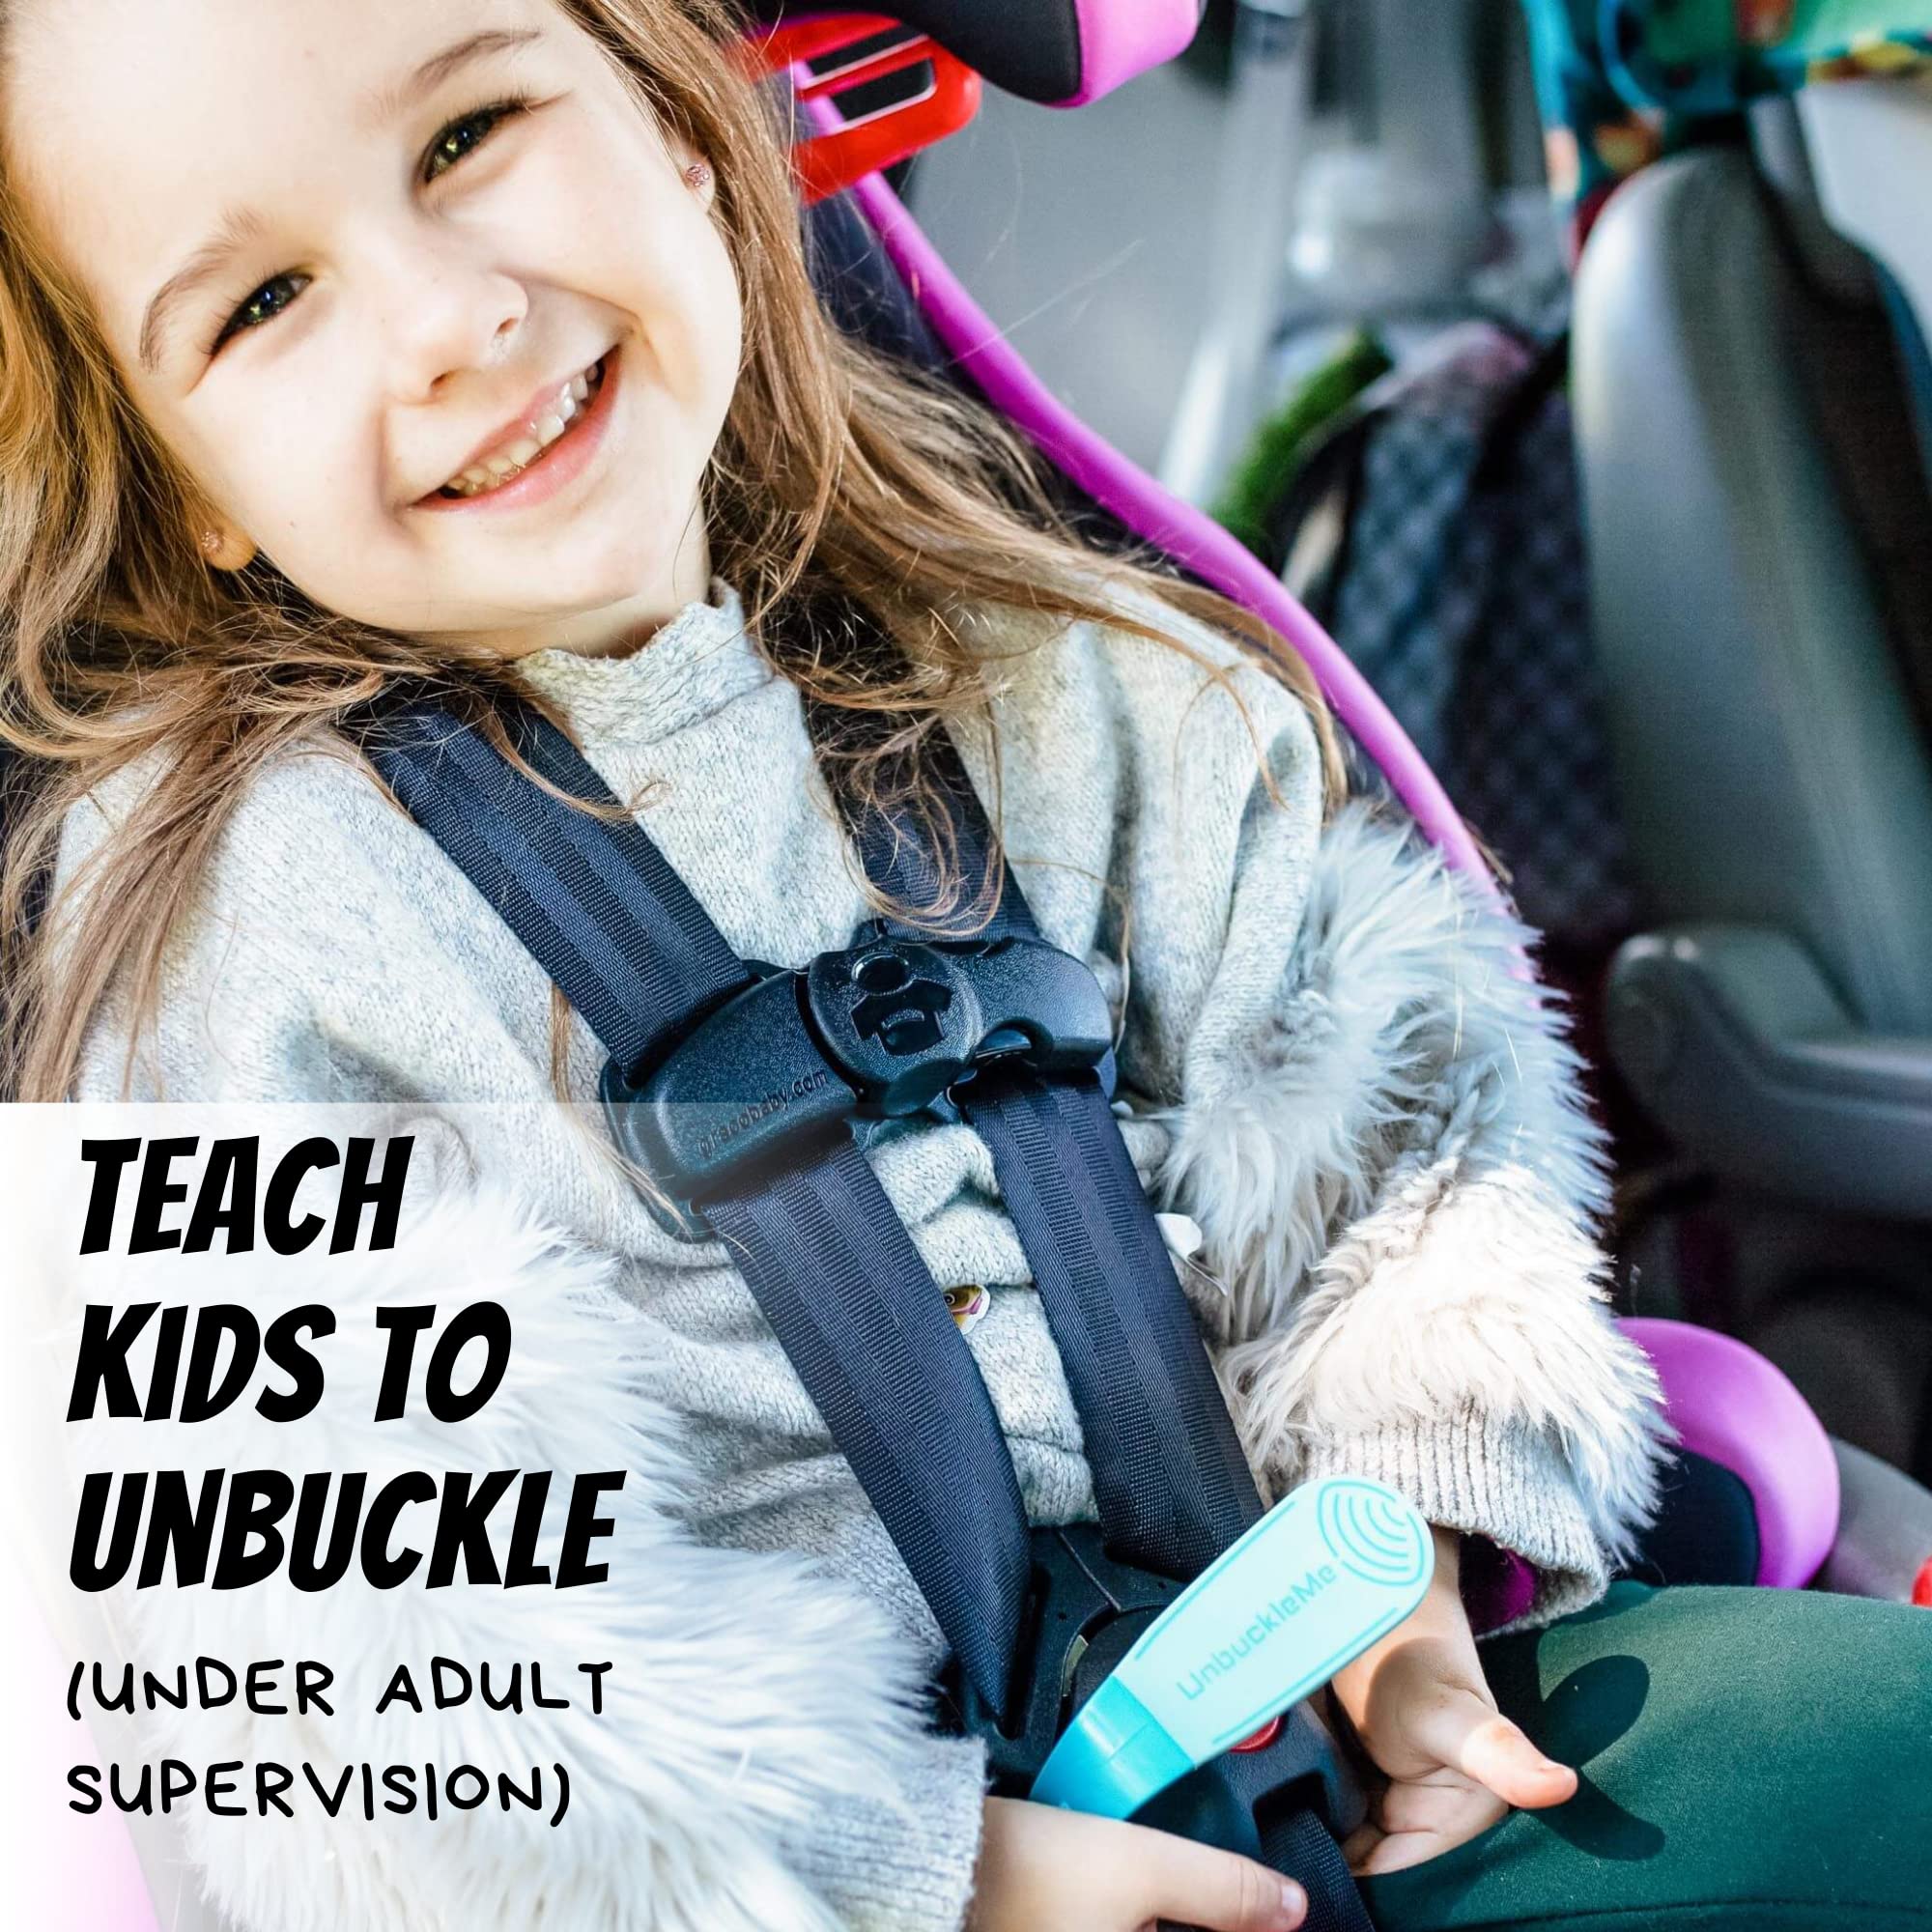 UnbuckleMe Car Seat Buckle Release Tool - Easy Opener Aid for Arthritis, Long Nails, Older Kids - Button Pusher for Infant, Toddler, Convertible 5 pt Harness car Seats - As Seen on Shark Tank (Aqua)